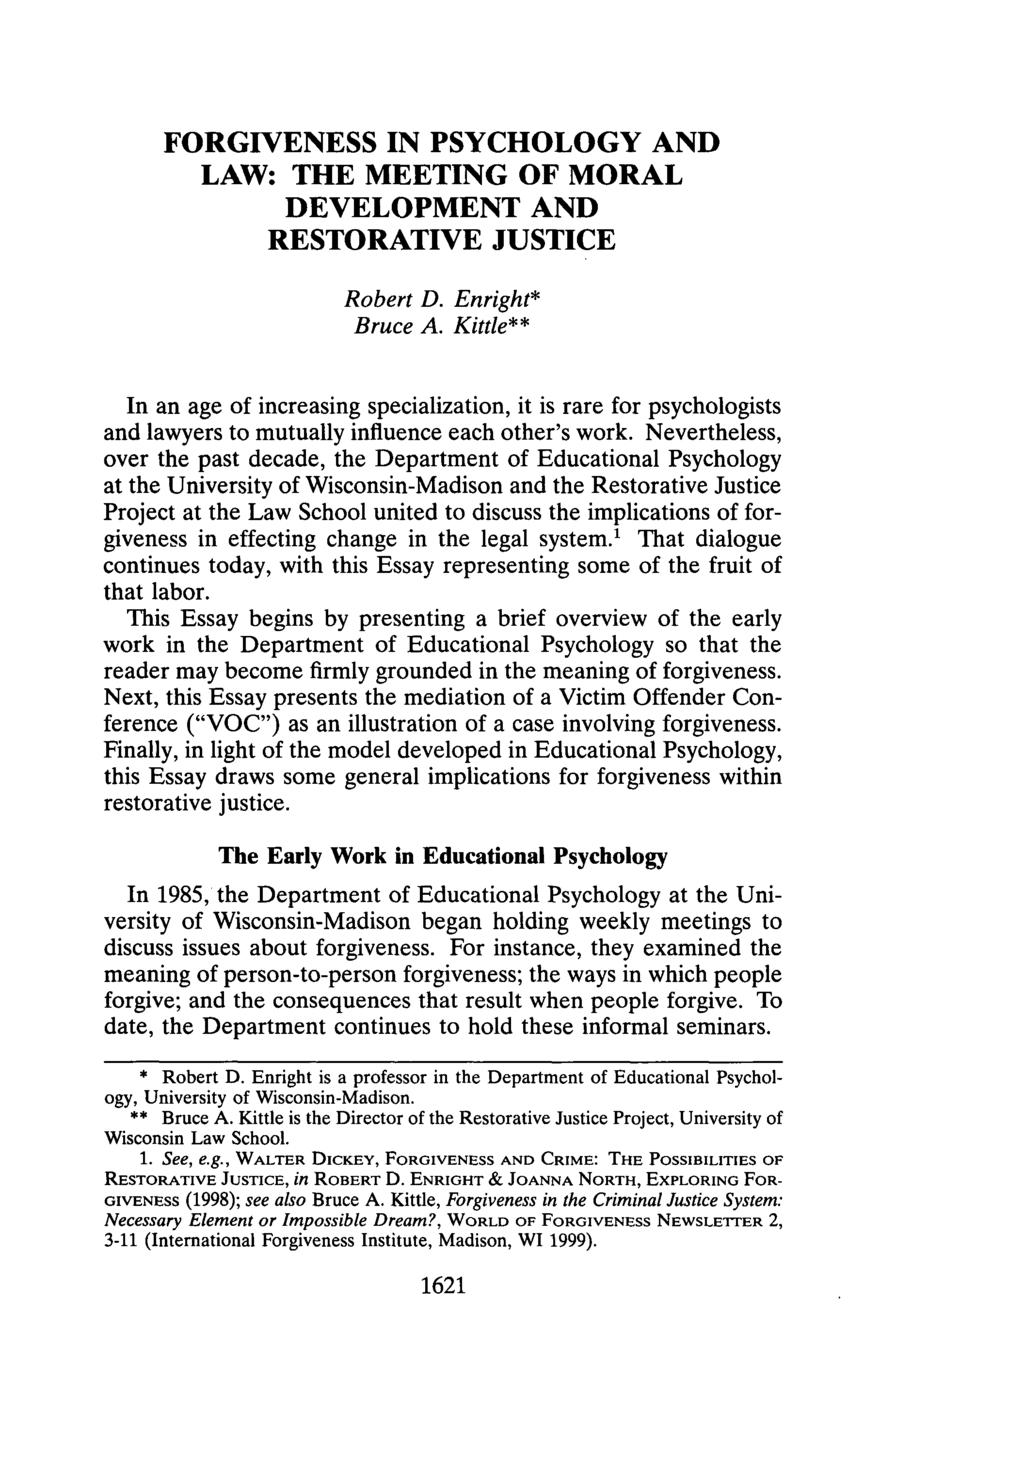 FORGIVENESS IN PSYCHOLOGY AND LAW: THE MEETING OF MORAL DEVELOPMENT AND RESTORATIVE JUSTICE Robert D. Enright* Bruce A.